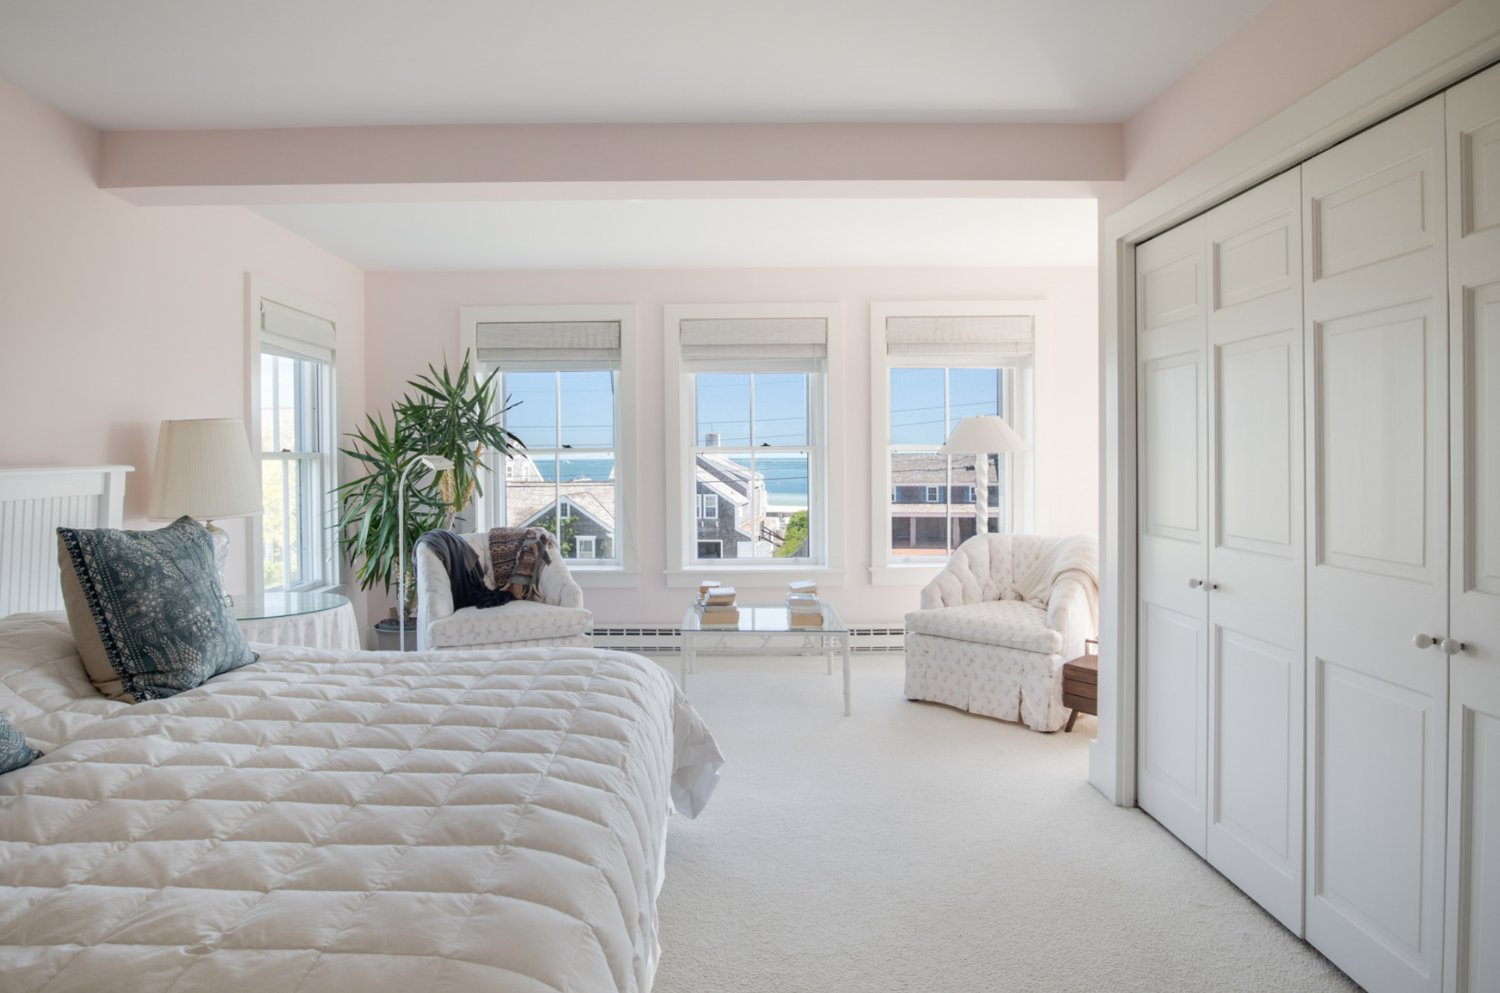 The second-floor master bedroom has a sitting area, ample closet space and an en-suite bath.